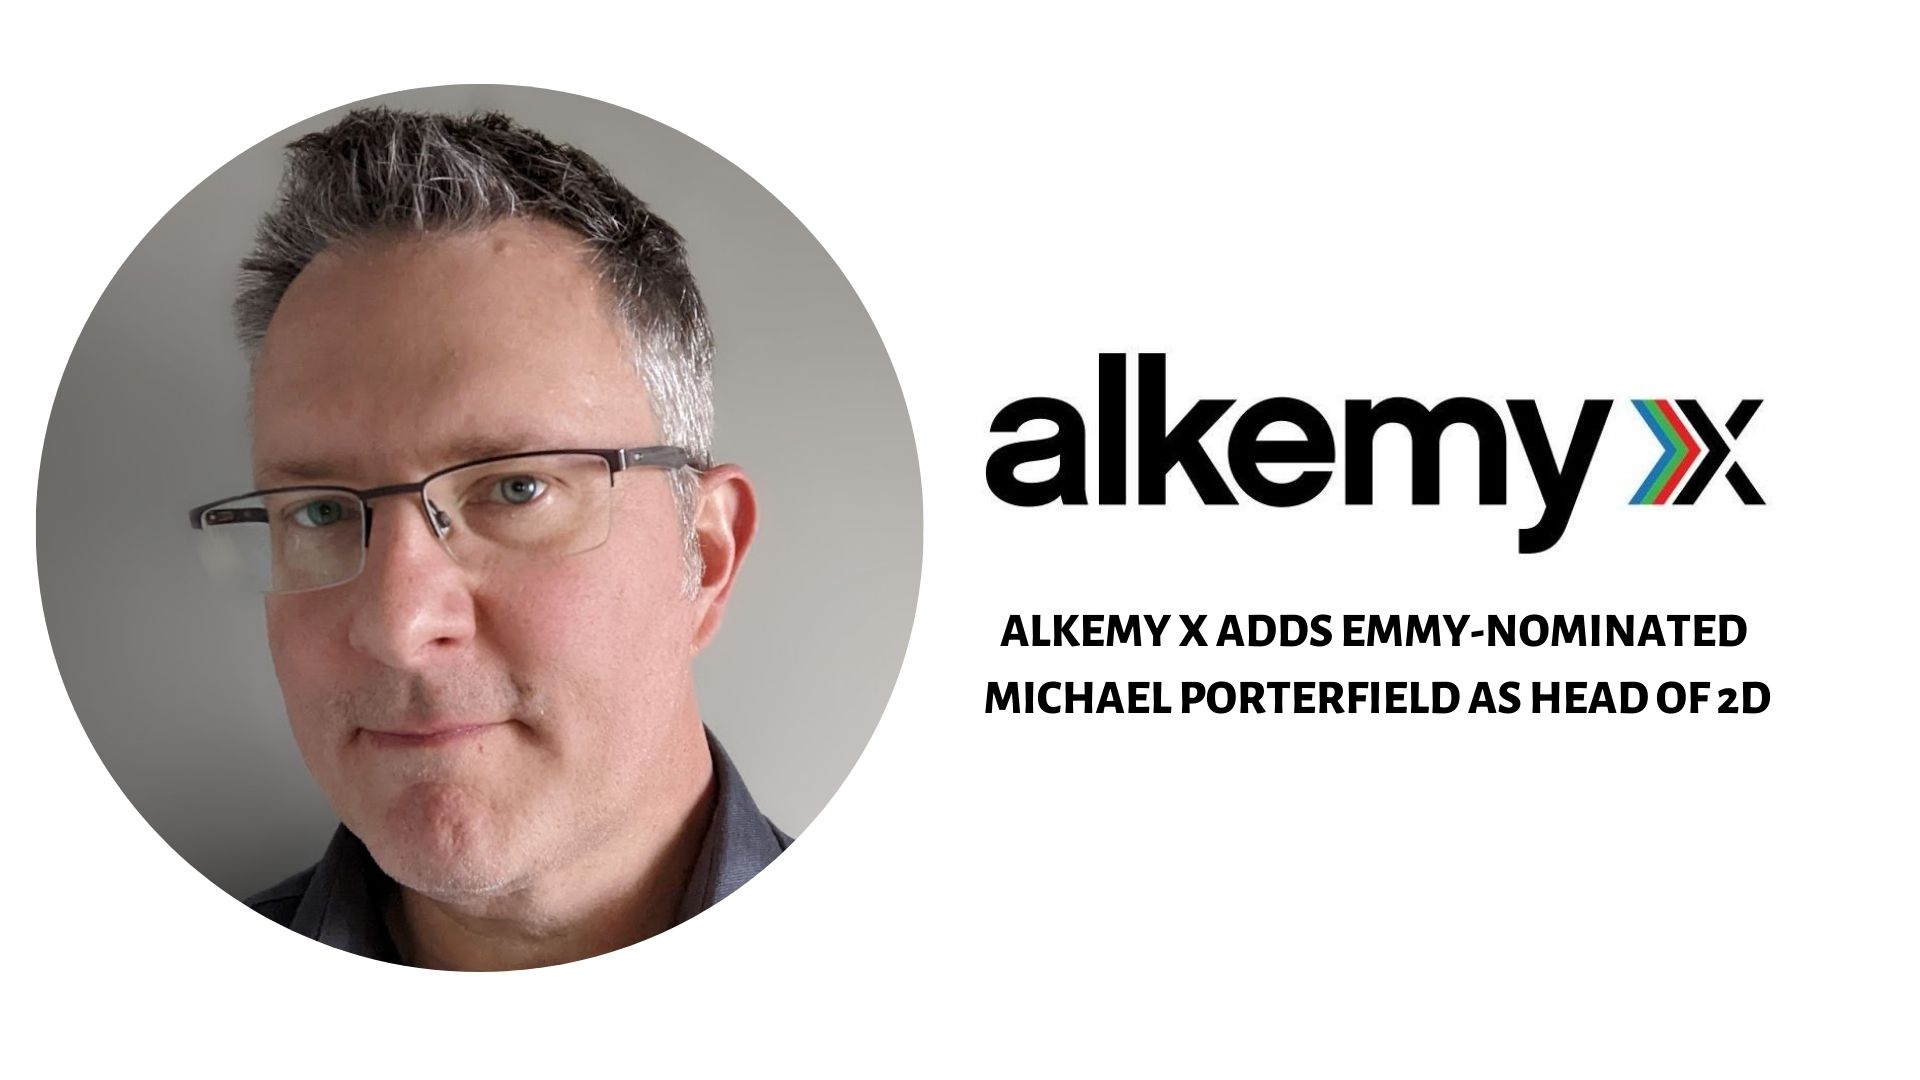 ALKEMY X ADDS EMMY-NOMINATED MICHAEL PORTERFIELD AS HEAD OF 2D